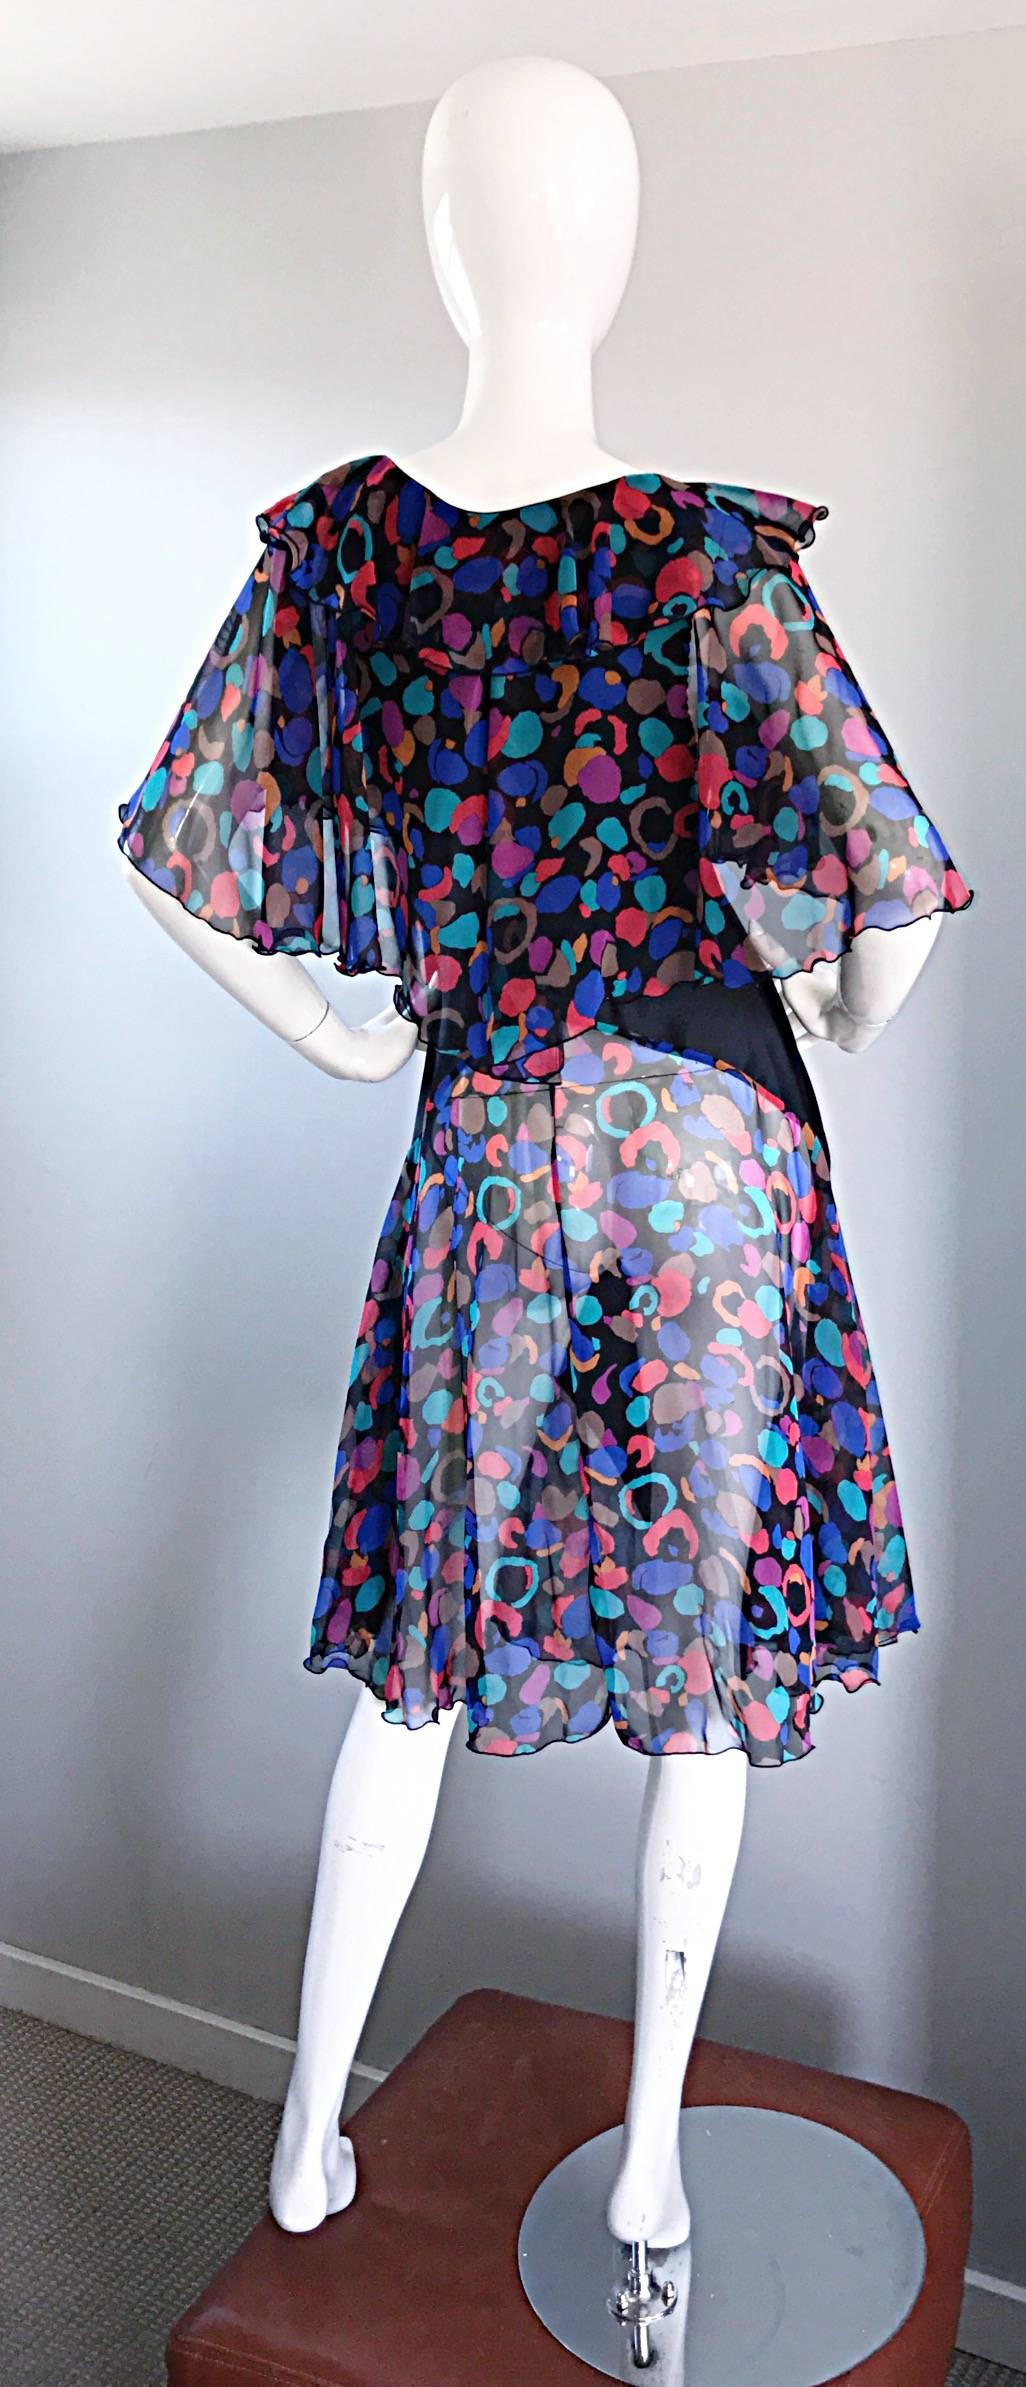 Bob Mackie Vintage 1980s Boho Colorful Black Semi Sheer Back Ruffle 80s Dress In Excellent Condition For Sale In San Diego, CA